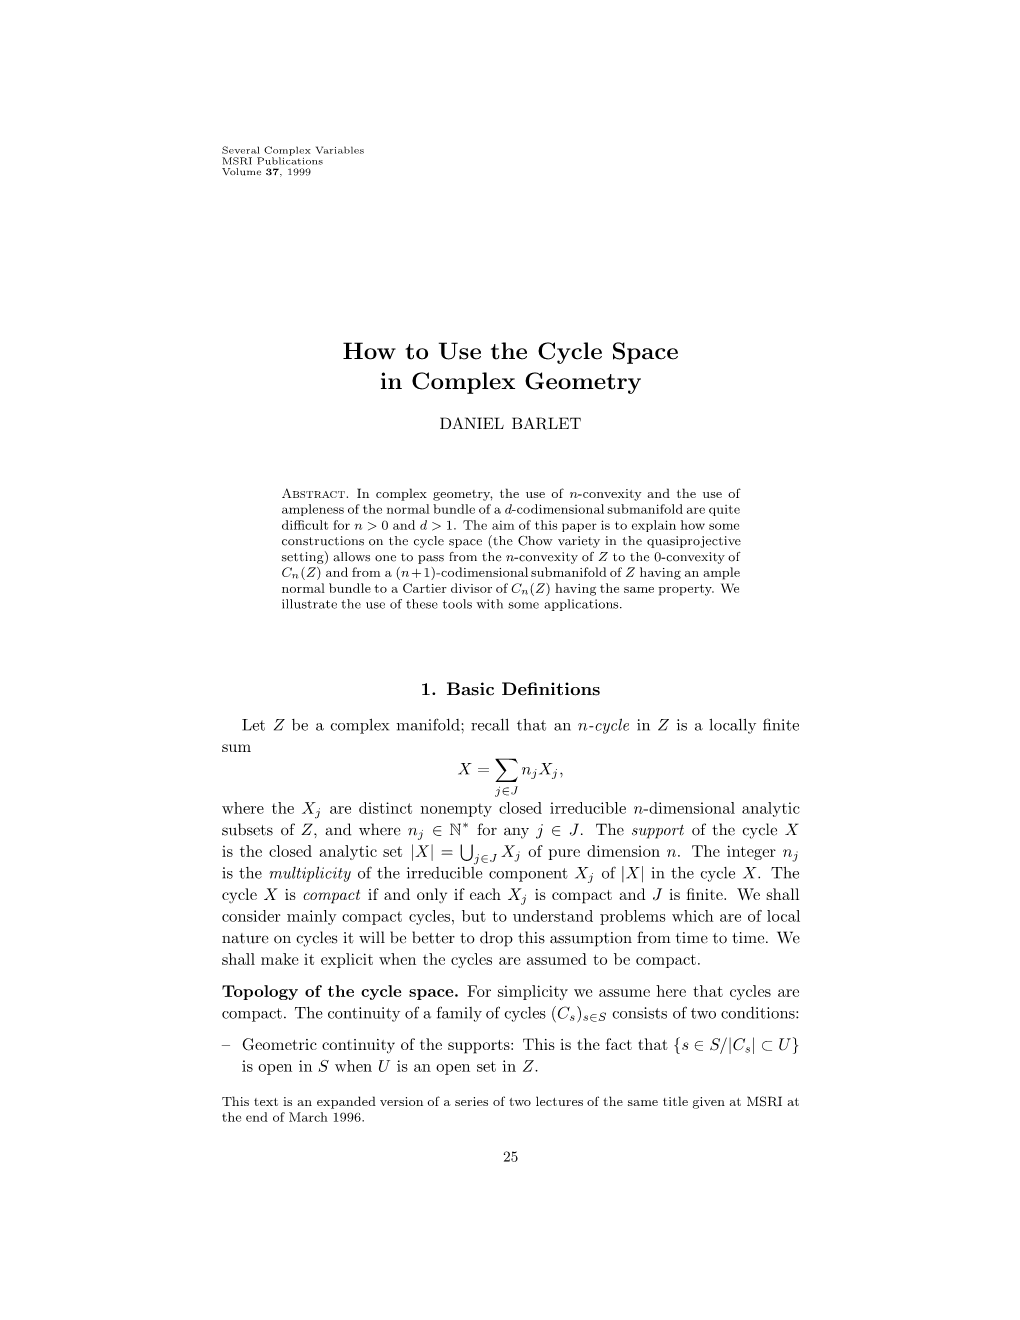 How to Use the Cycle Space in Complex Geometry 27